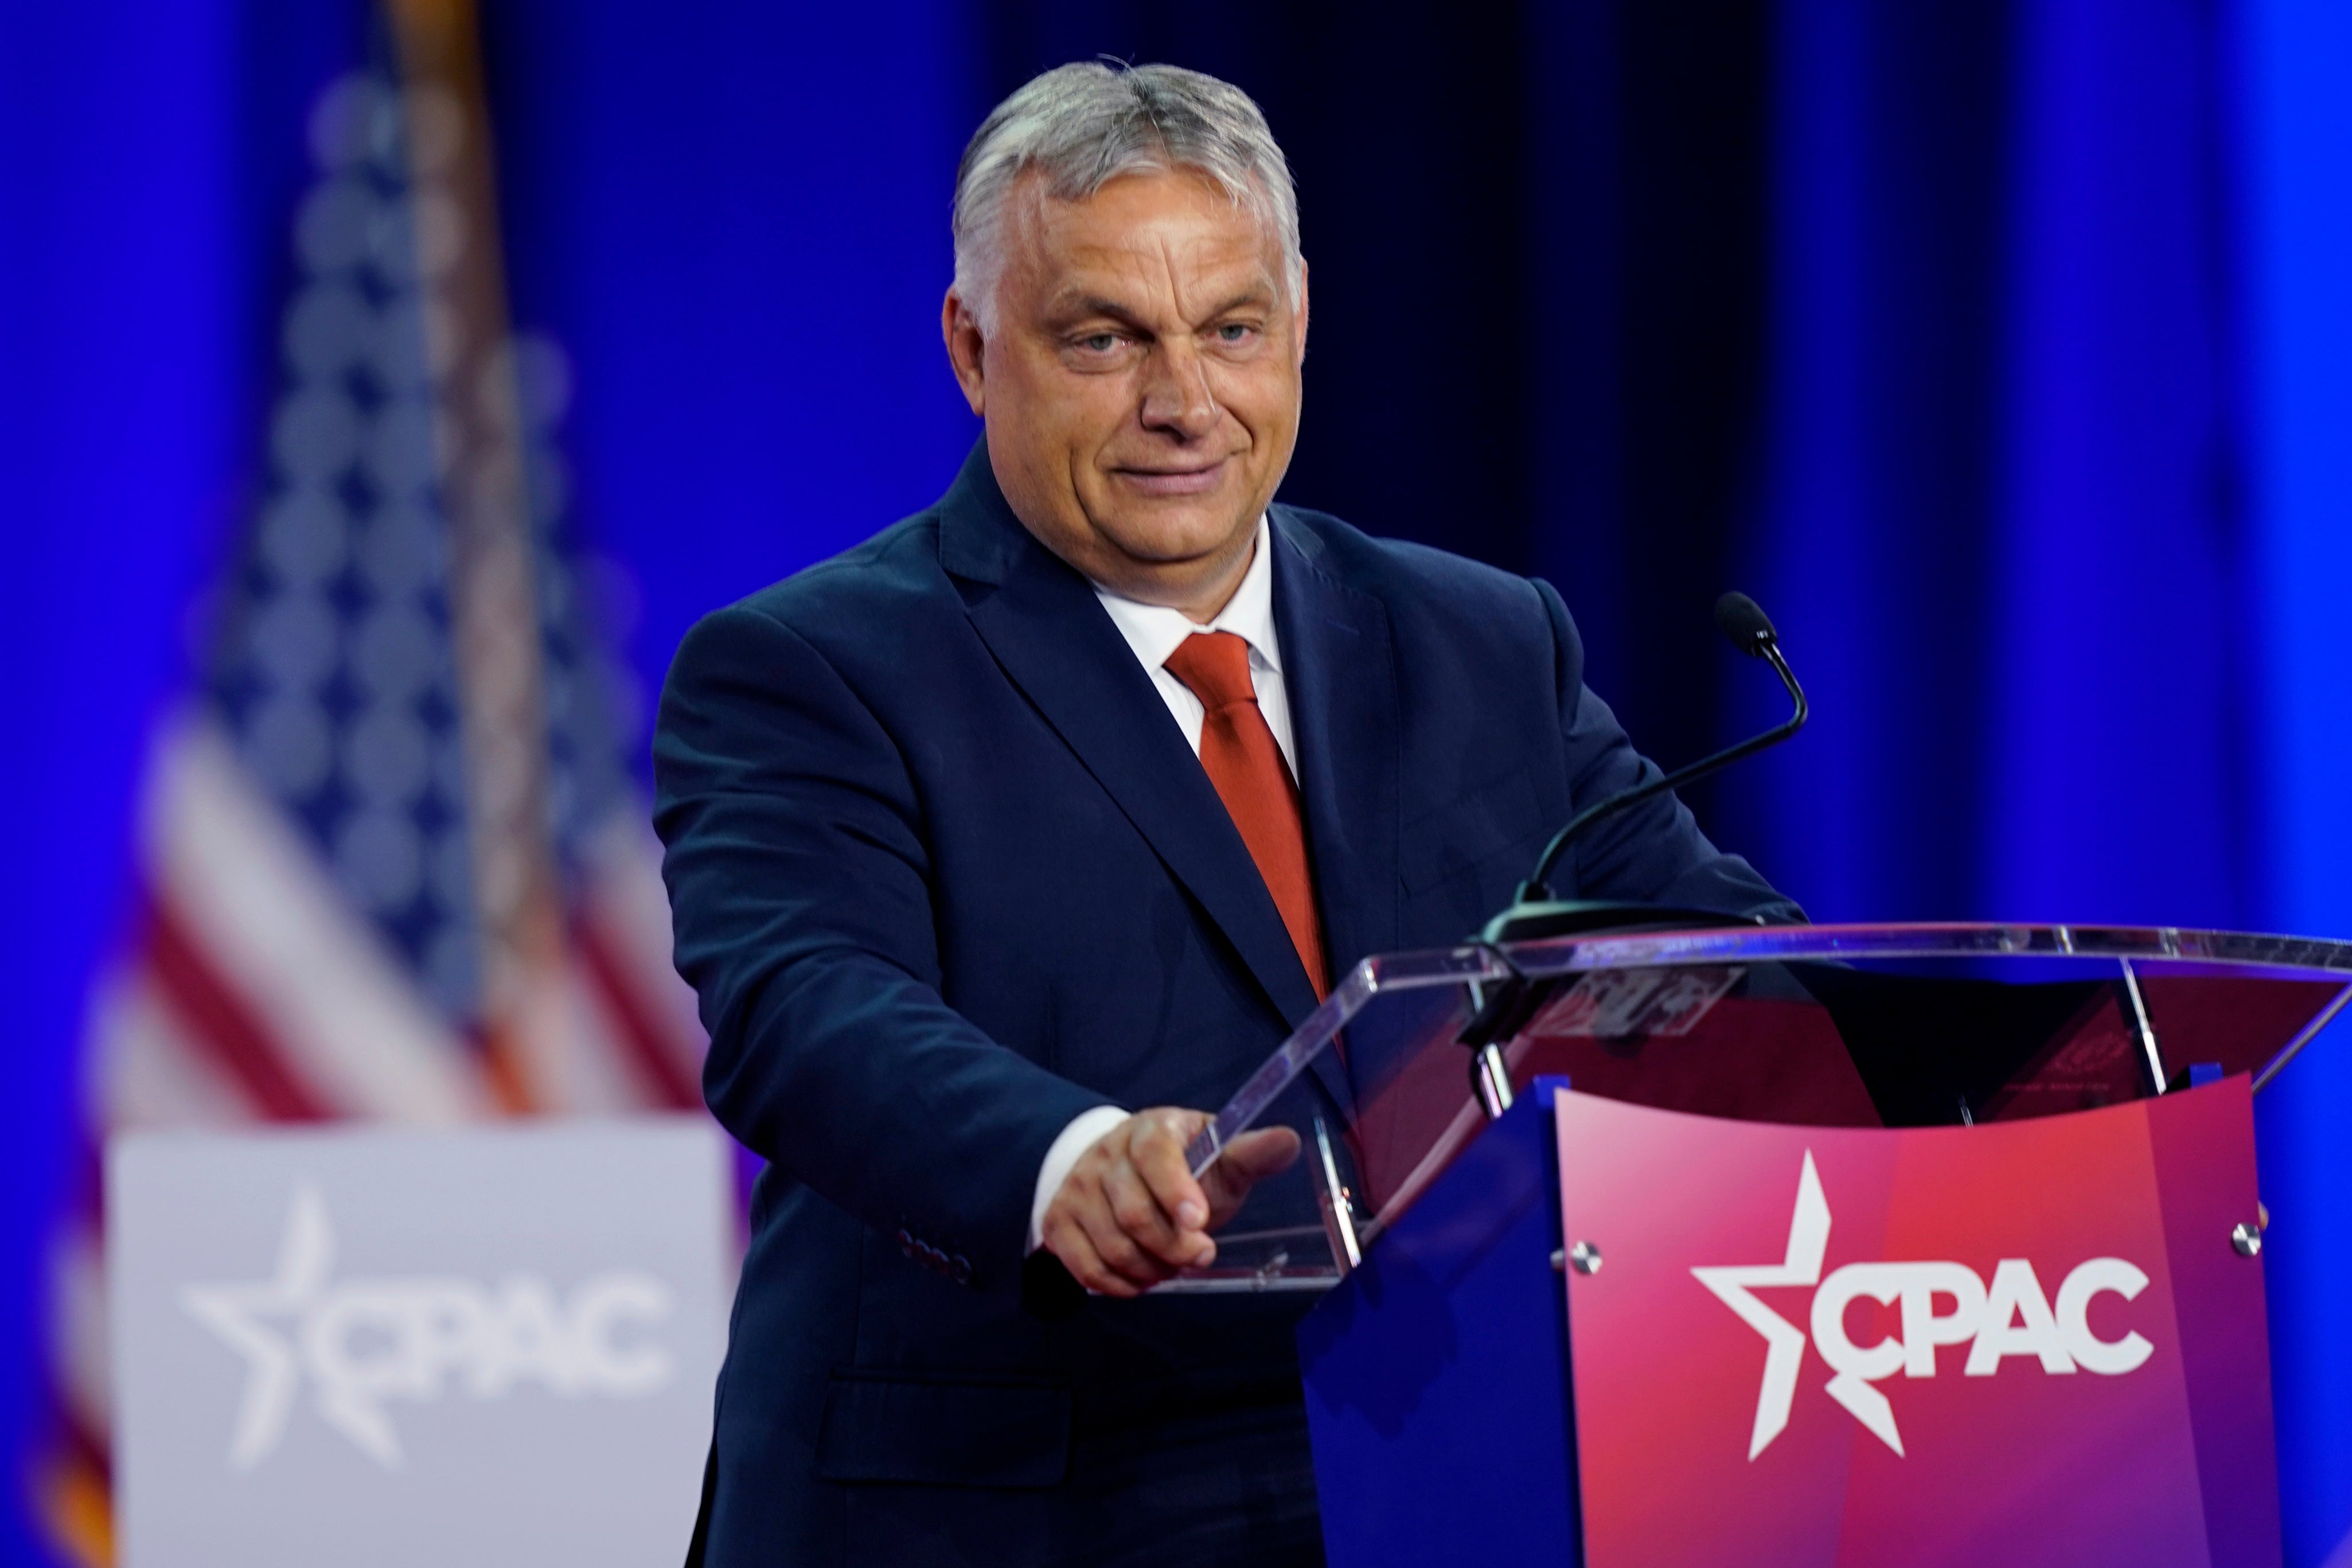 Hungarian Prime Minister Viktor Orban speaks at the Conservative Political Action Conference (CPAC) in Dallas, Thursday, Aug. 4, 2022.